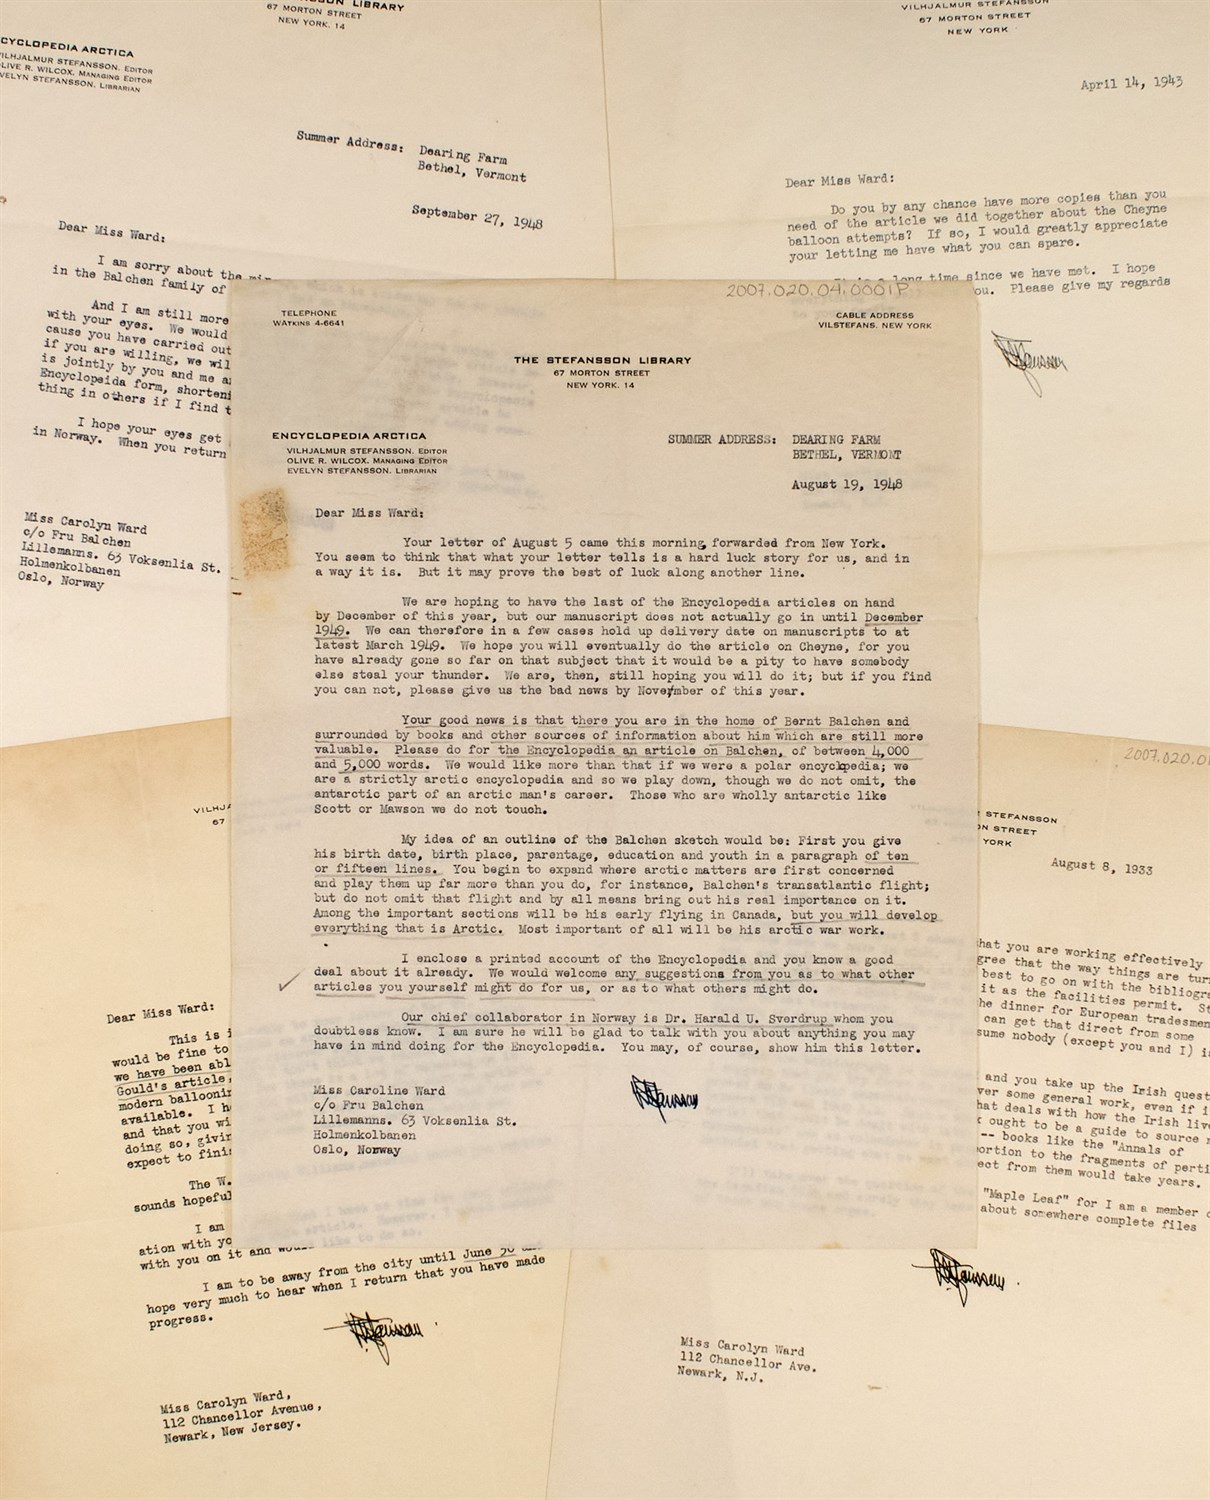 Lot 48 - [ARCTIC]
STEFANSSON, VILHJALMUR. Five typed letters signed to Carolyn Ward, 1933-48.